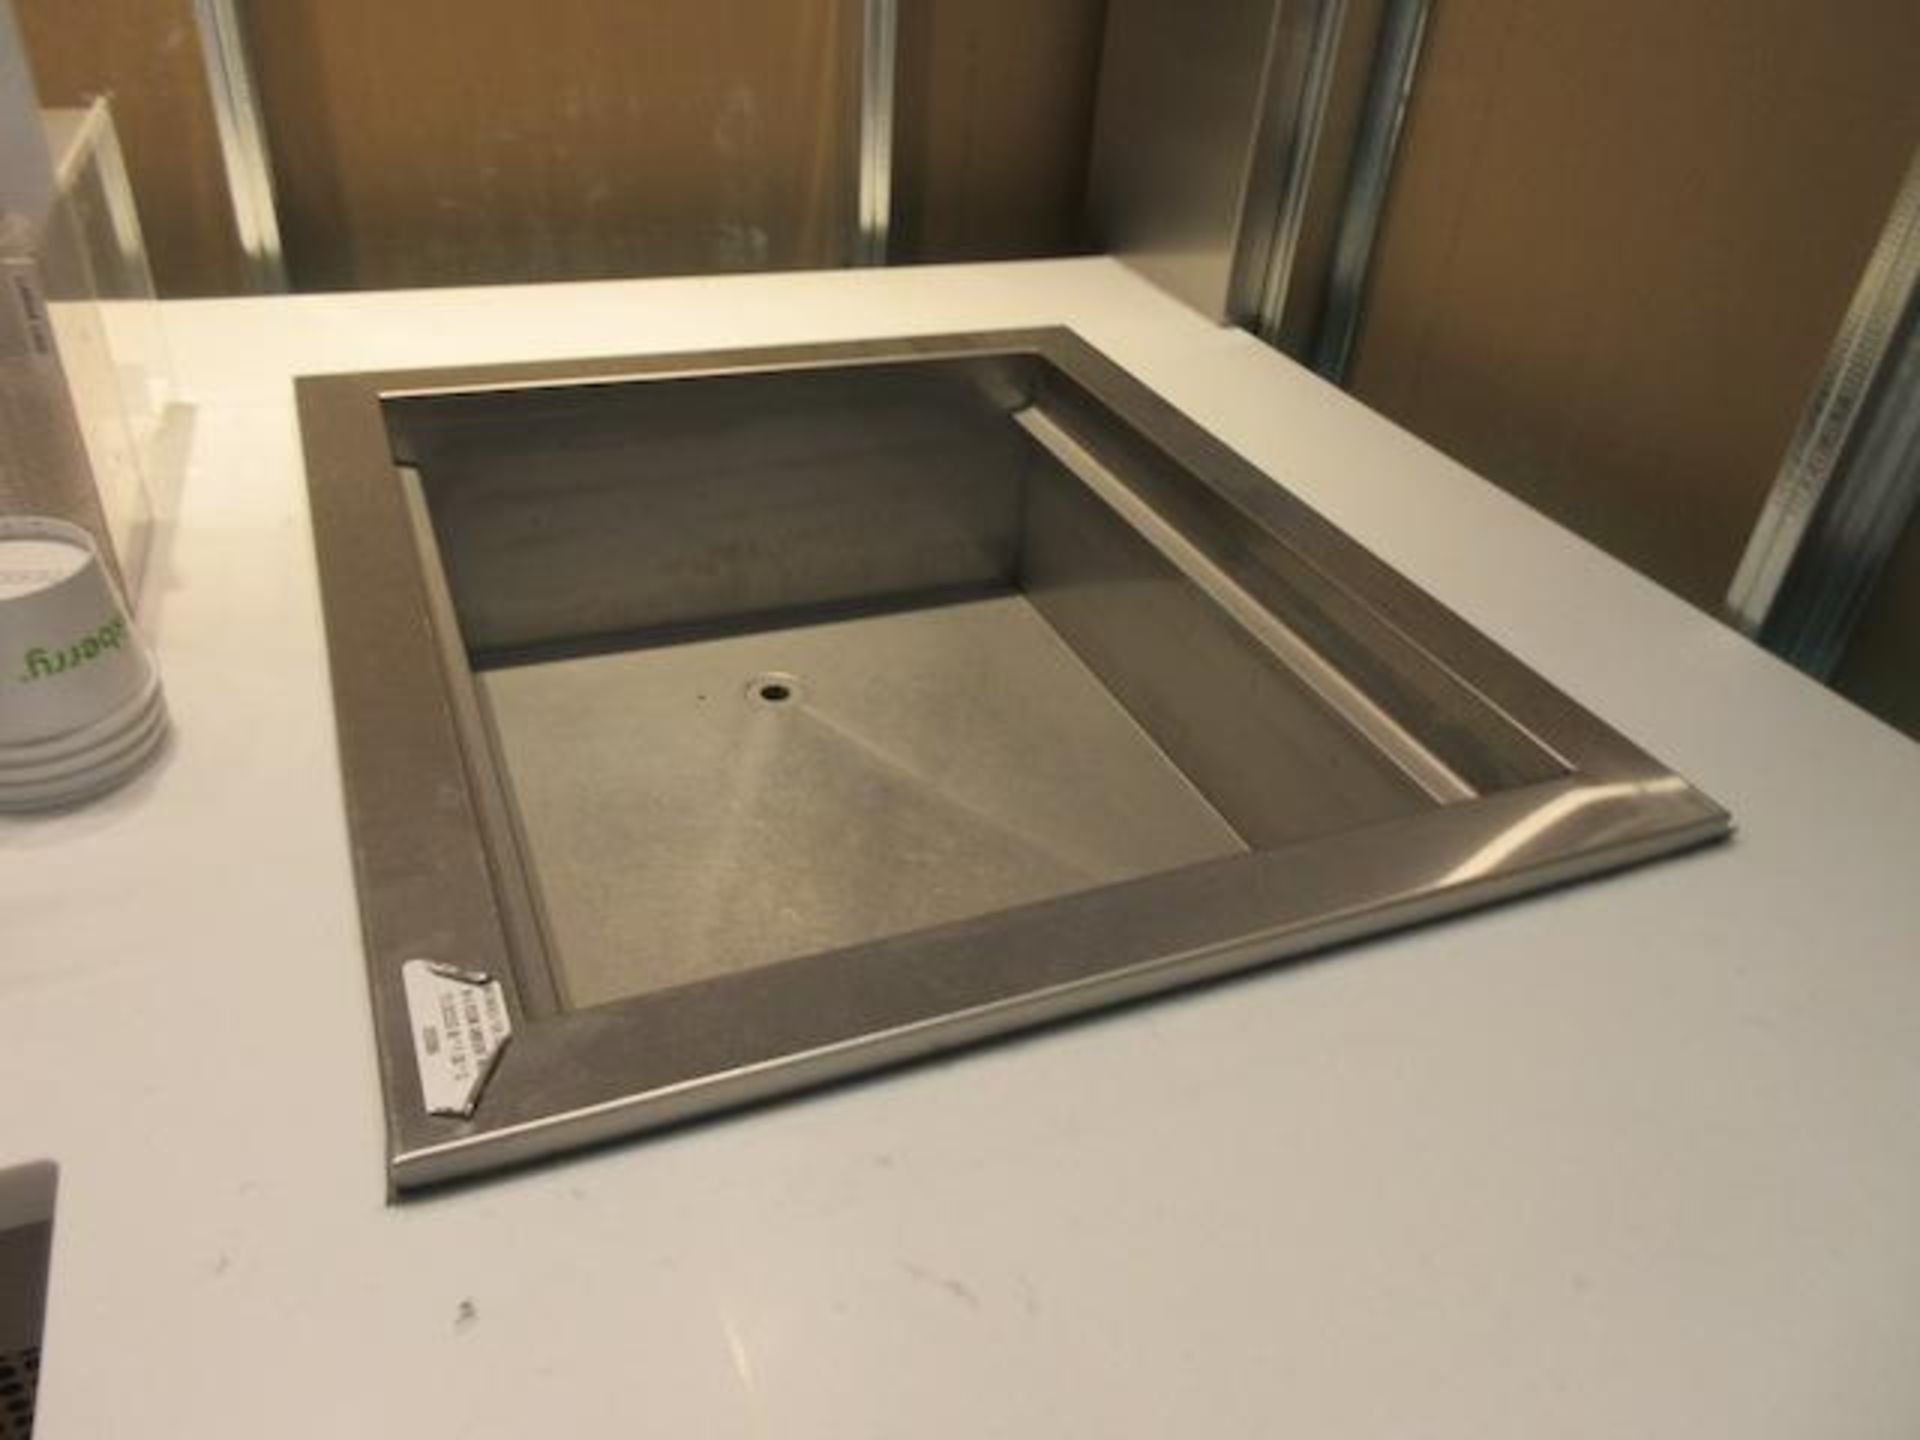 Delfield Manitowoc counter drop in refrigerated cold well, model N8130B, 21.5" x 26" x 9.5", sn 1501